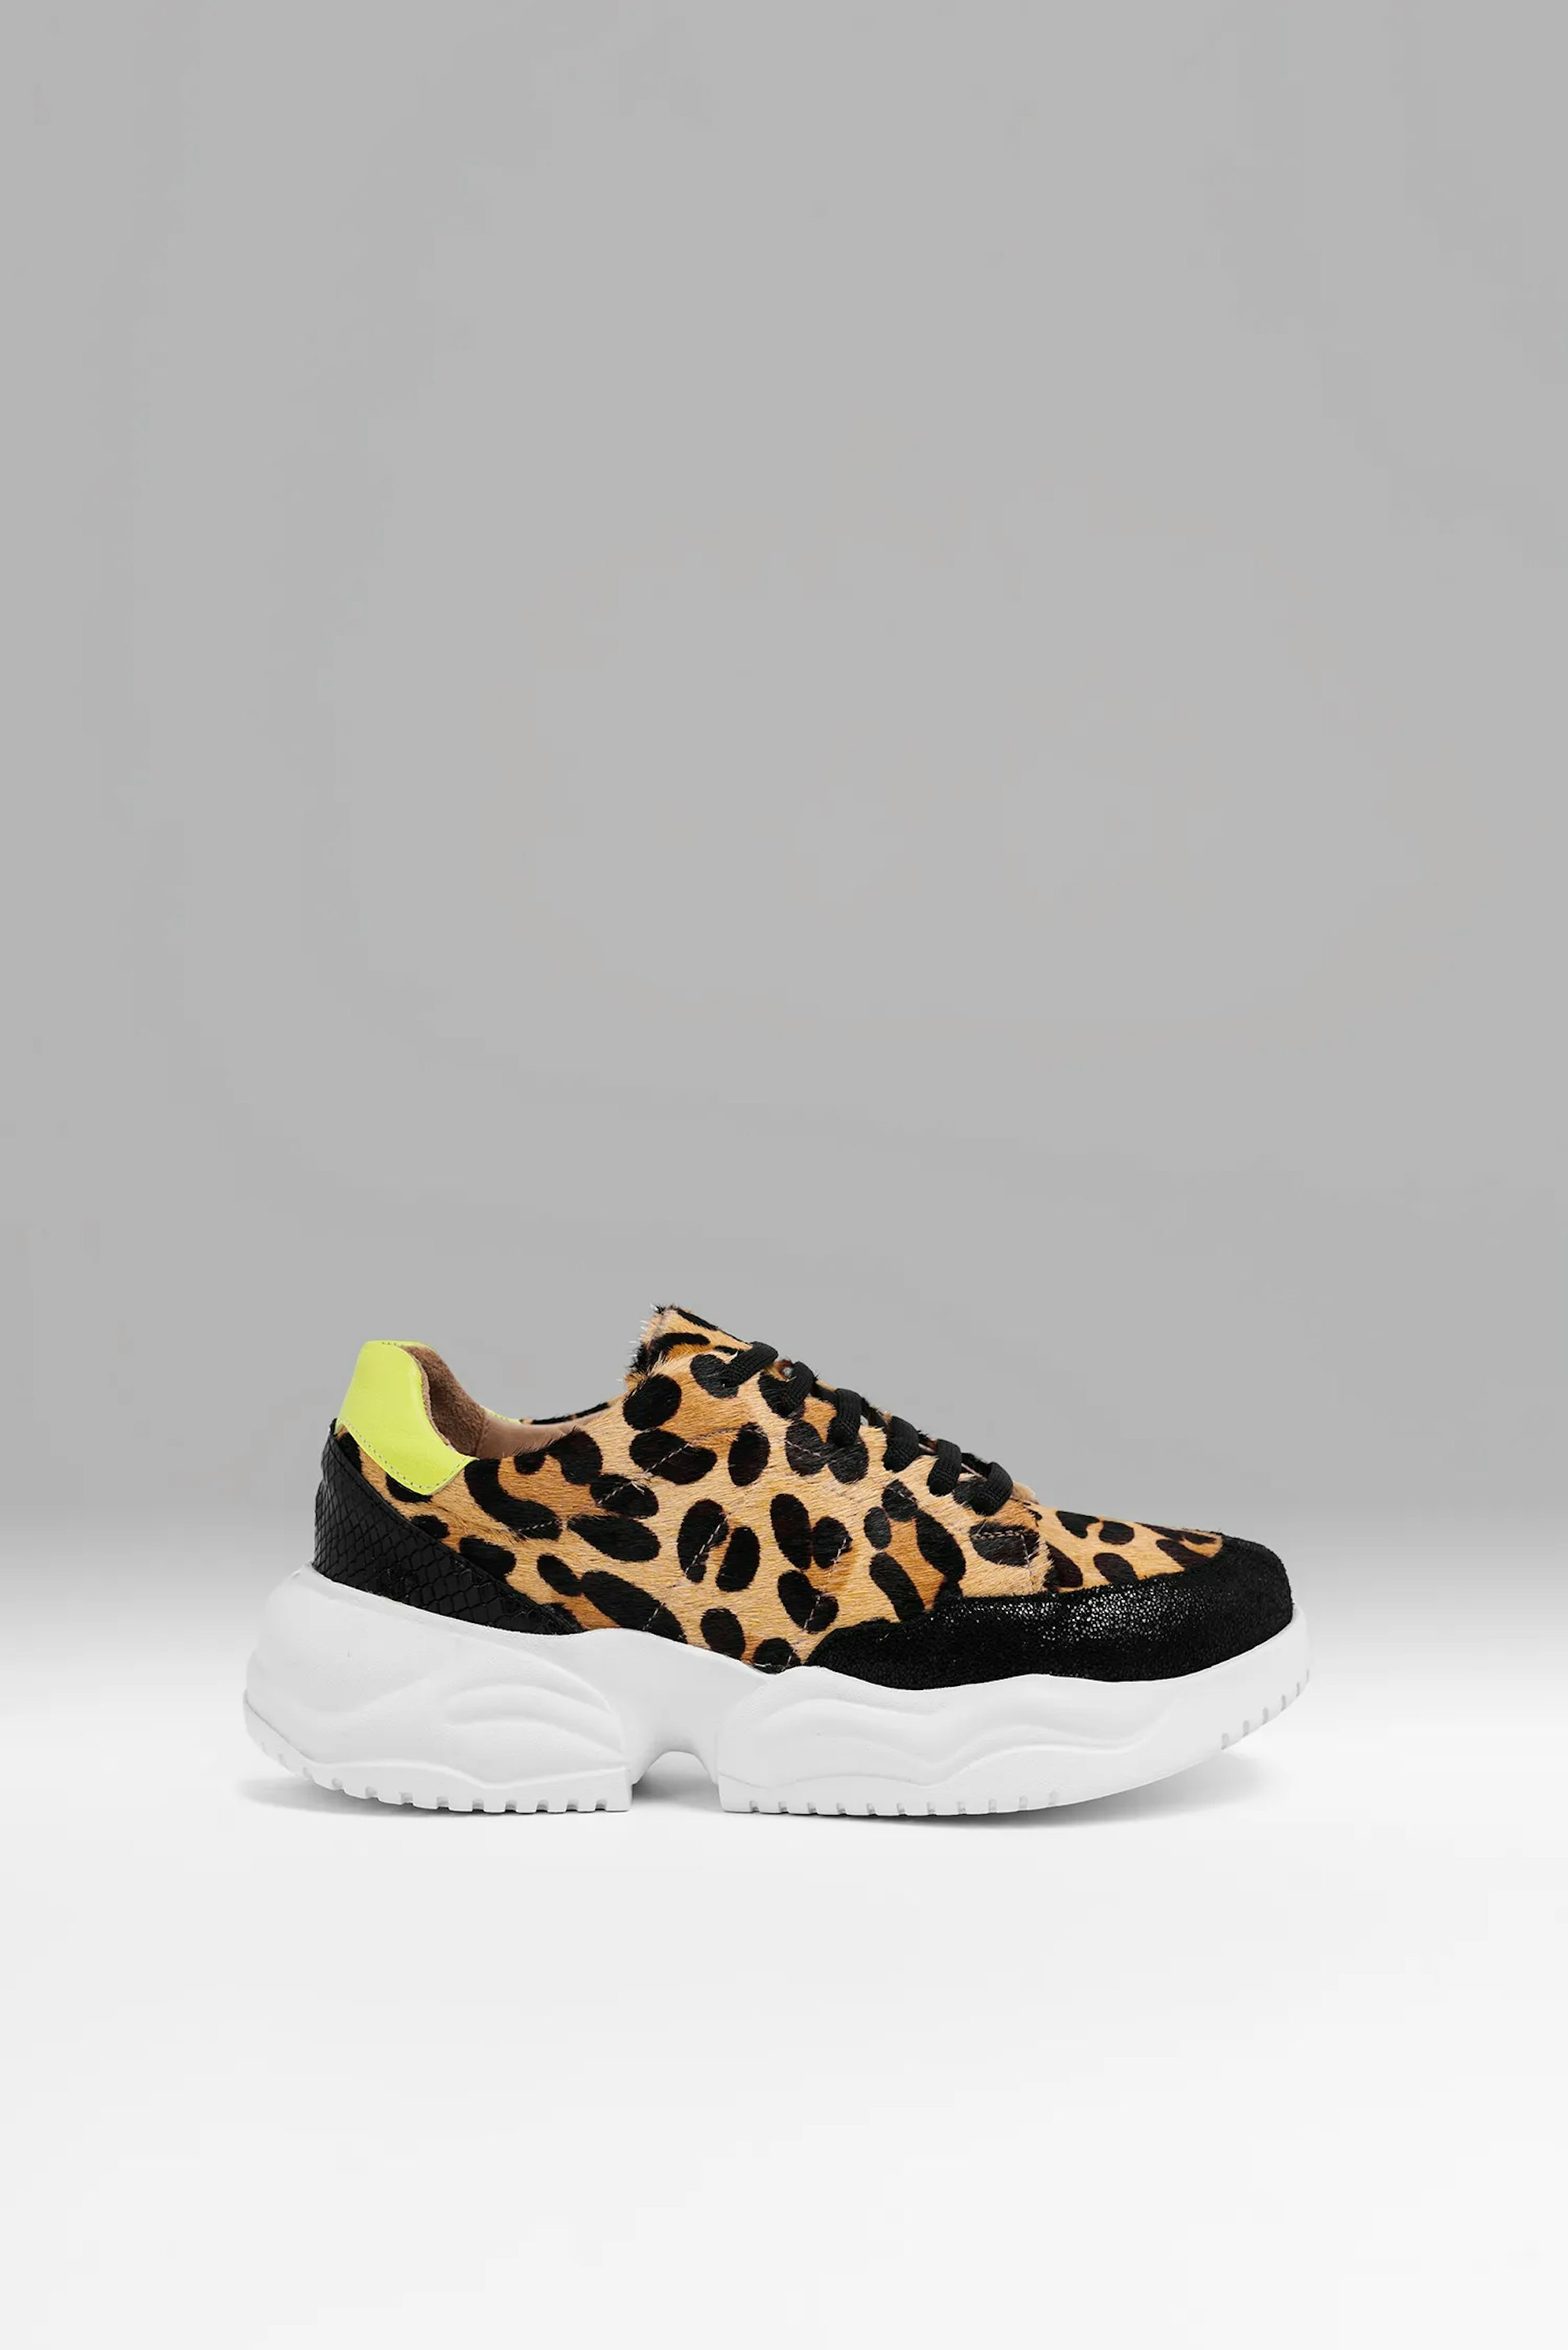 Sneakers Vitti Cadiz. Sneaker made 100% of leather. High, ultra-light, and flexible base. Upper in animal print hair-on leSneaker made 100% of leather. High, ultra-light, and flexible base. Upper in animal print hair-on le...